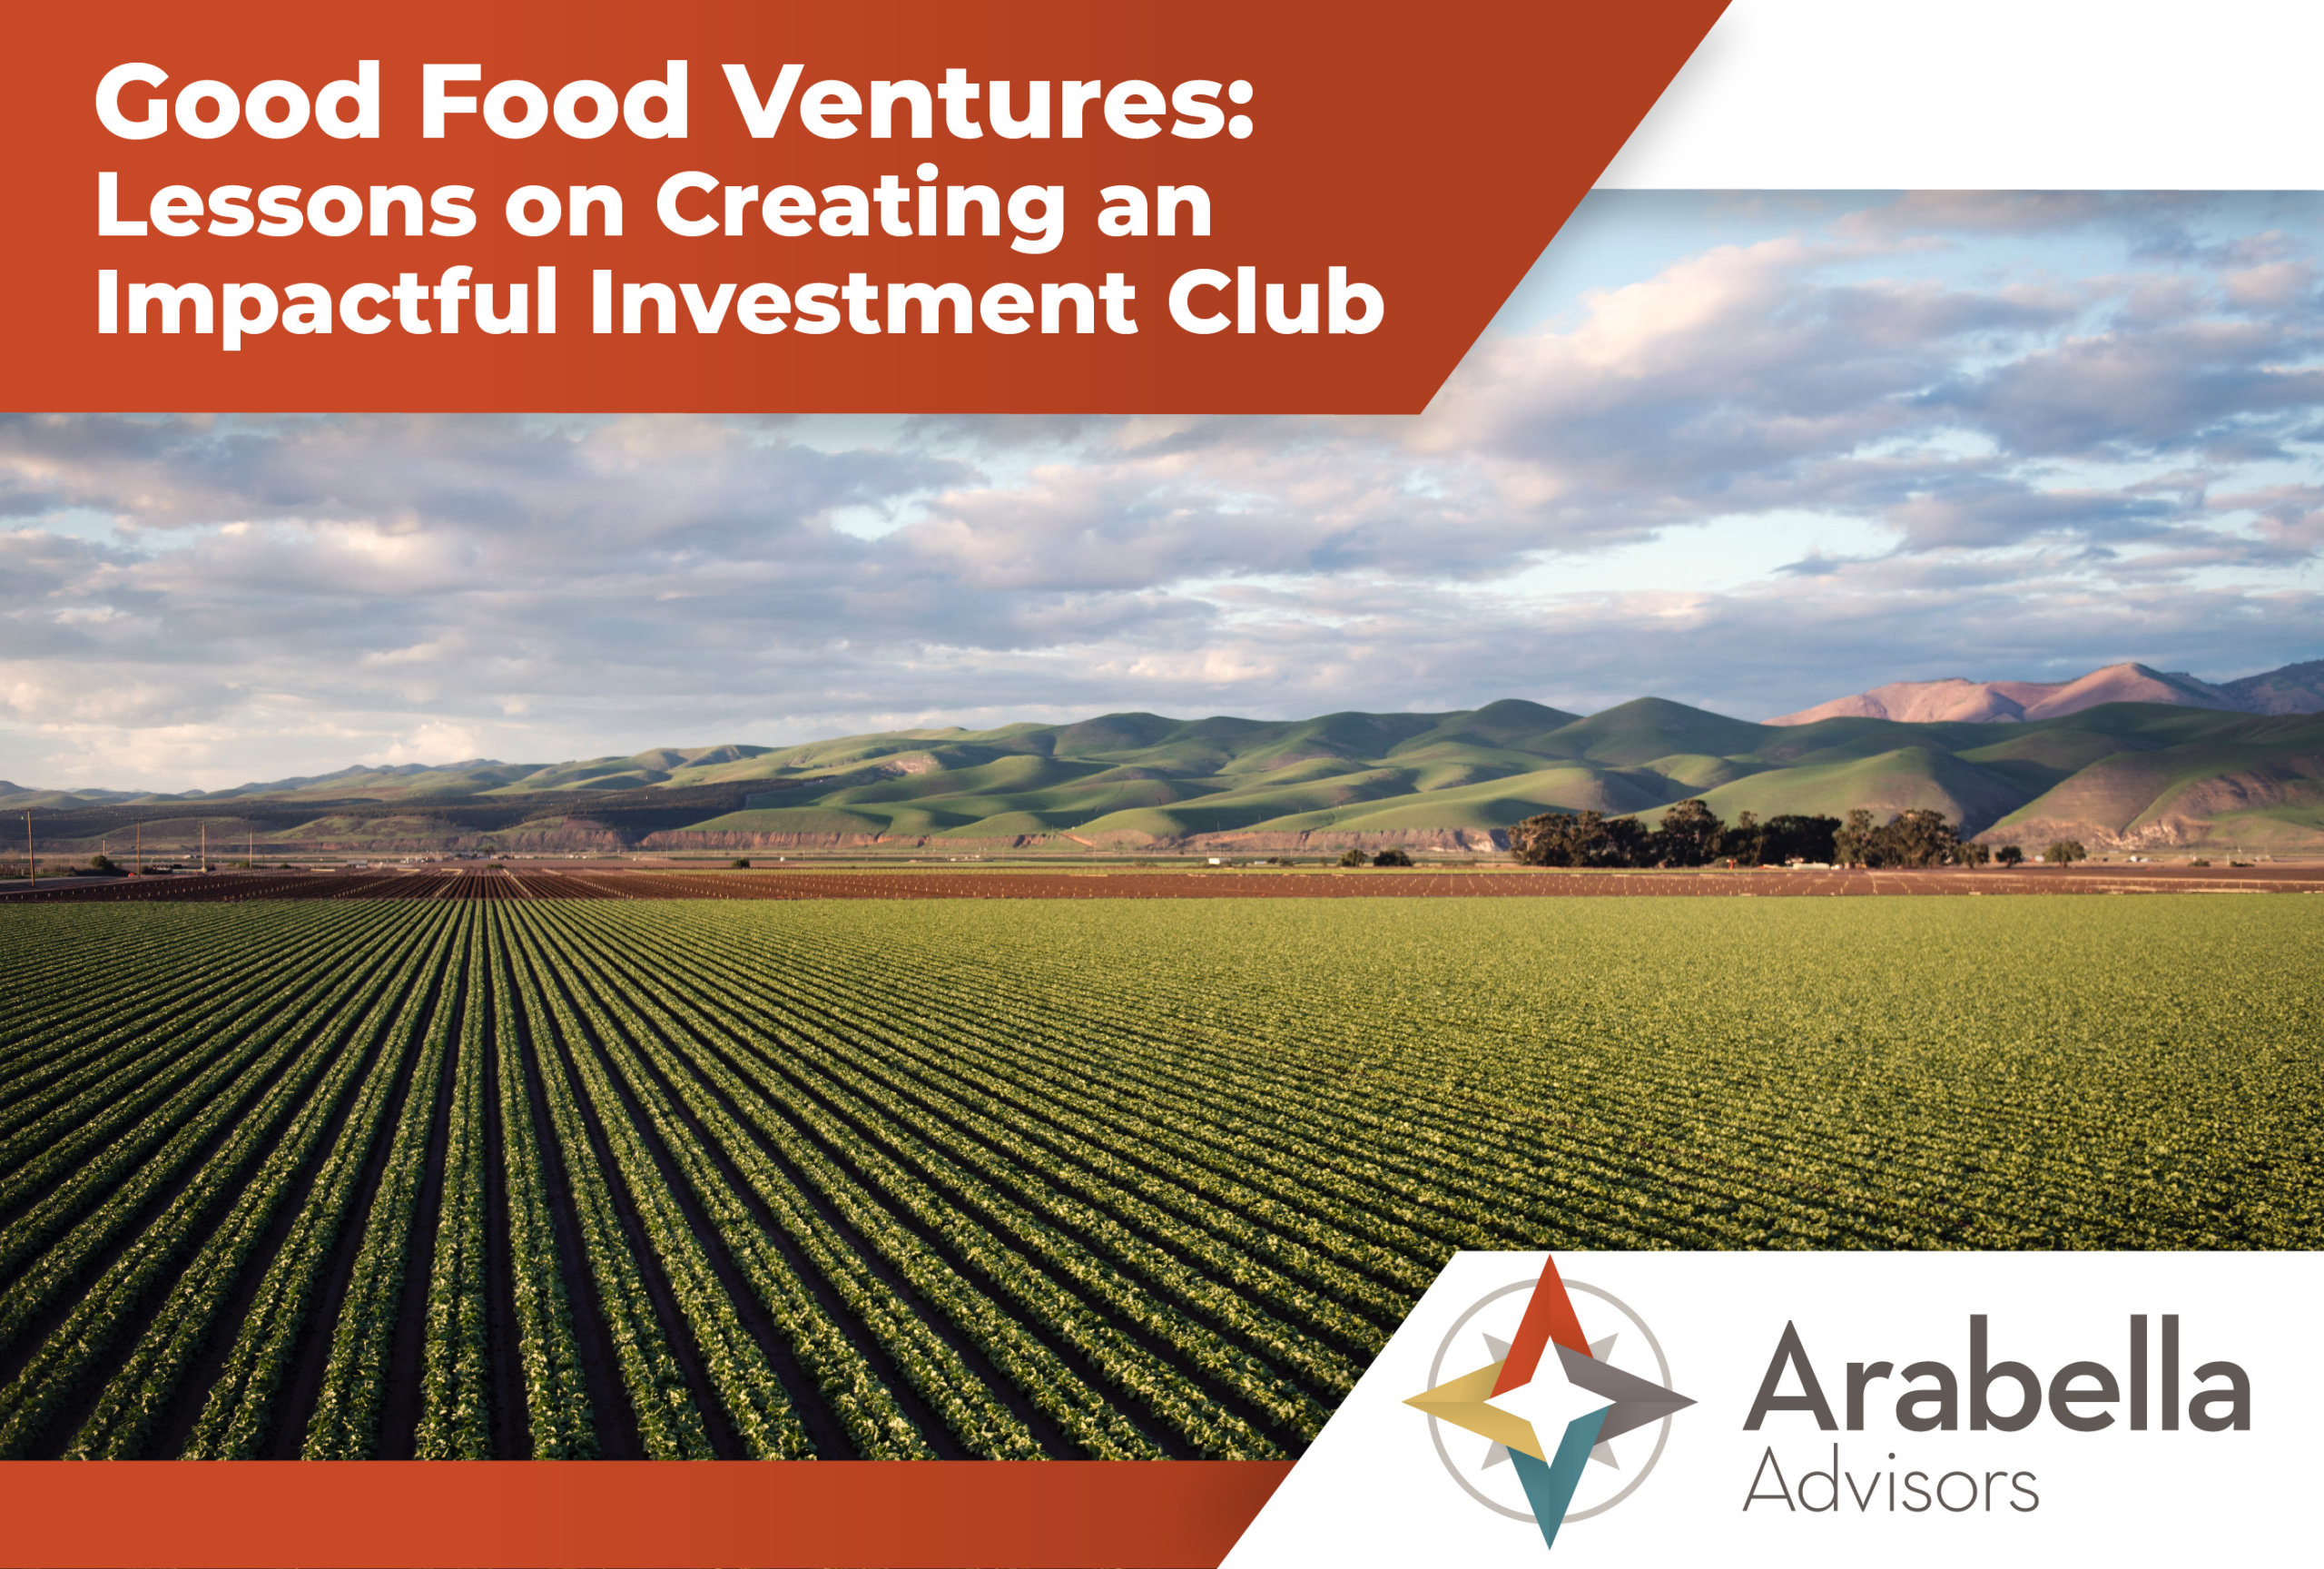 Good Food Ventures: Lessons on Creating an Impactful Investment Club